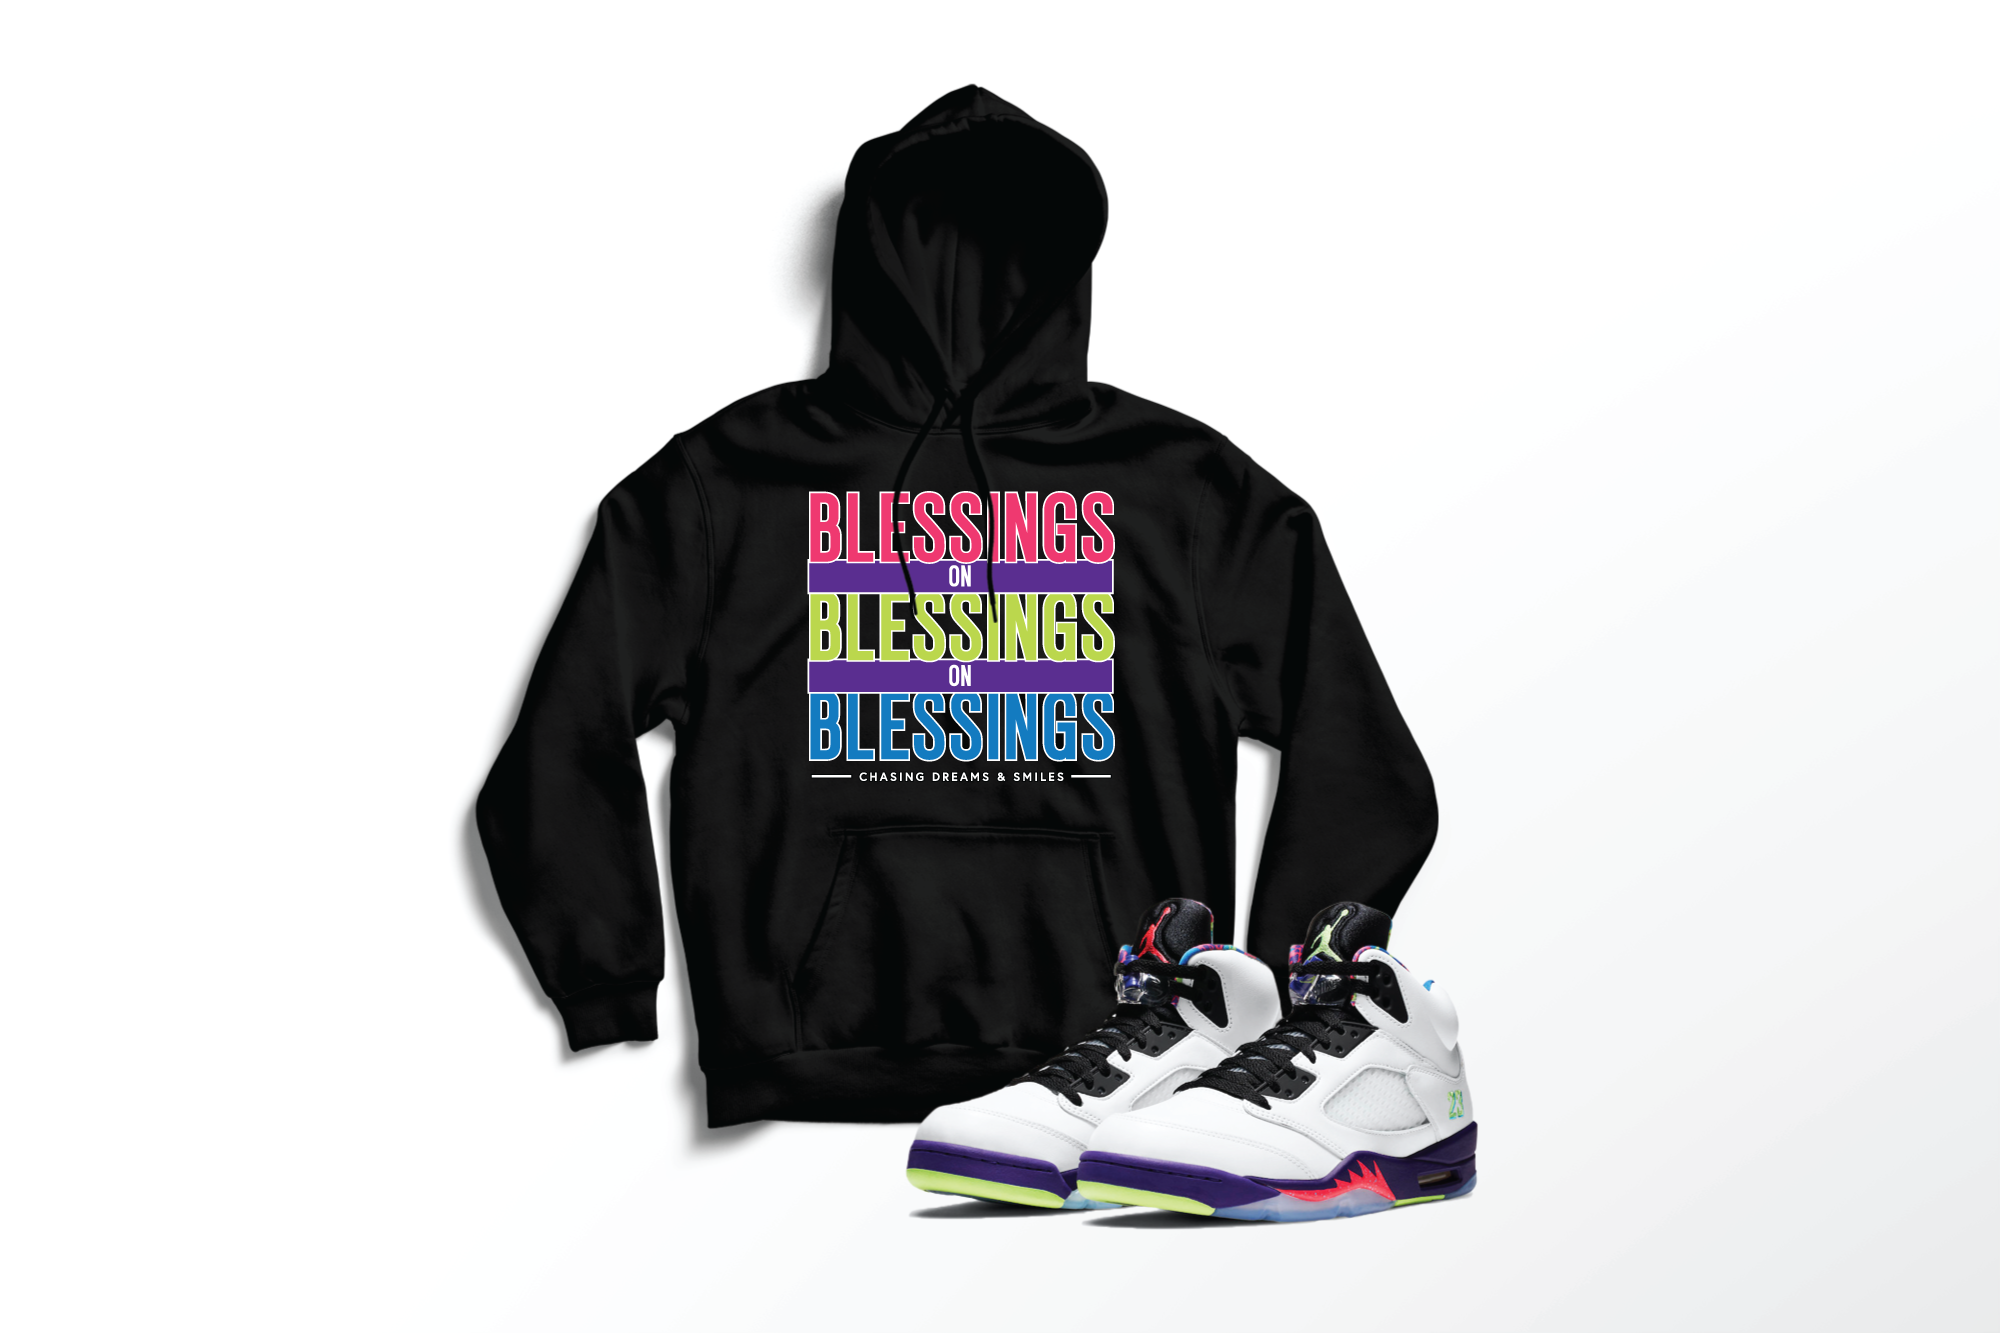 'Blessings On Blessings' in Ghost Green CW Unisex Pullover Hoodie